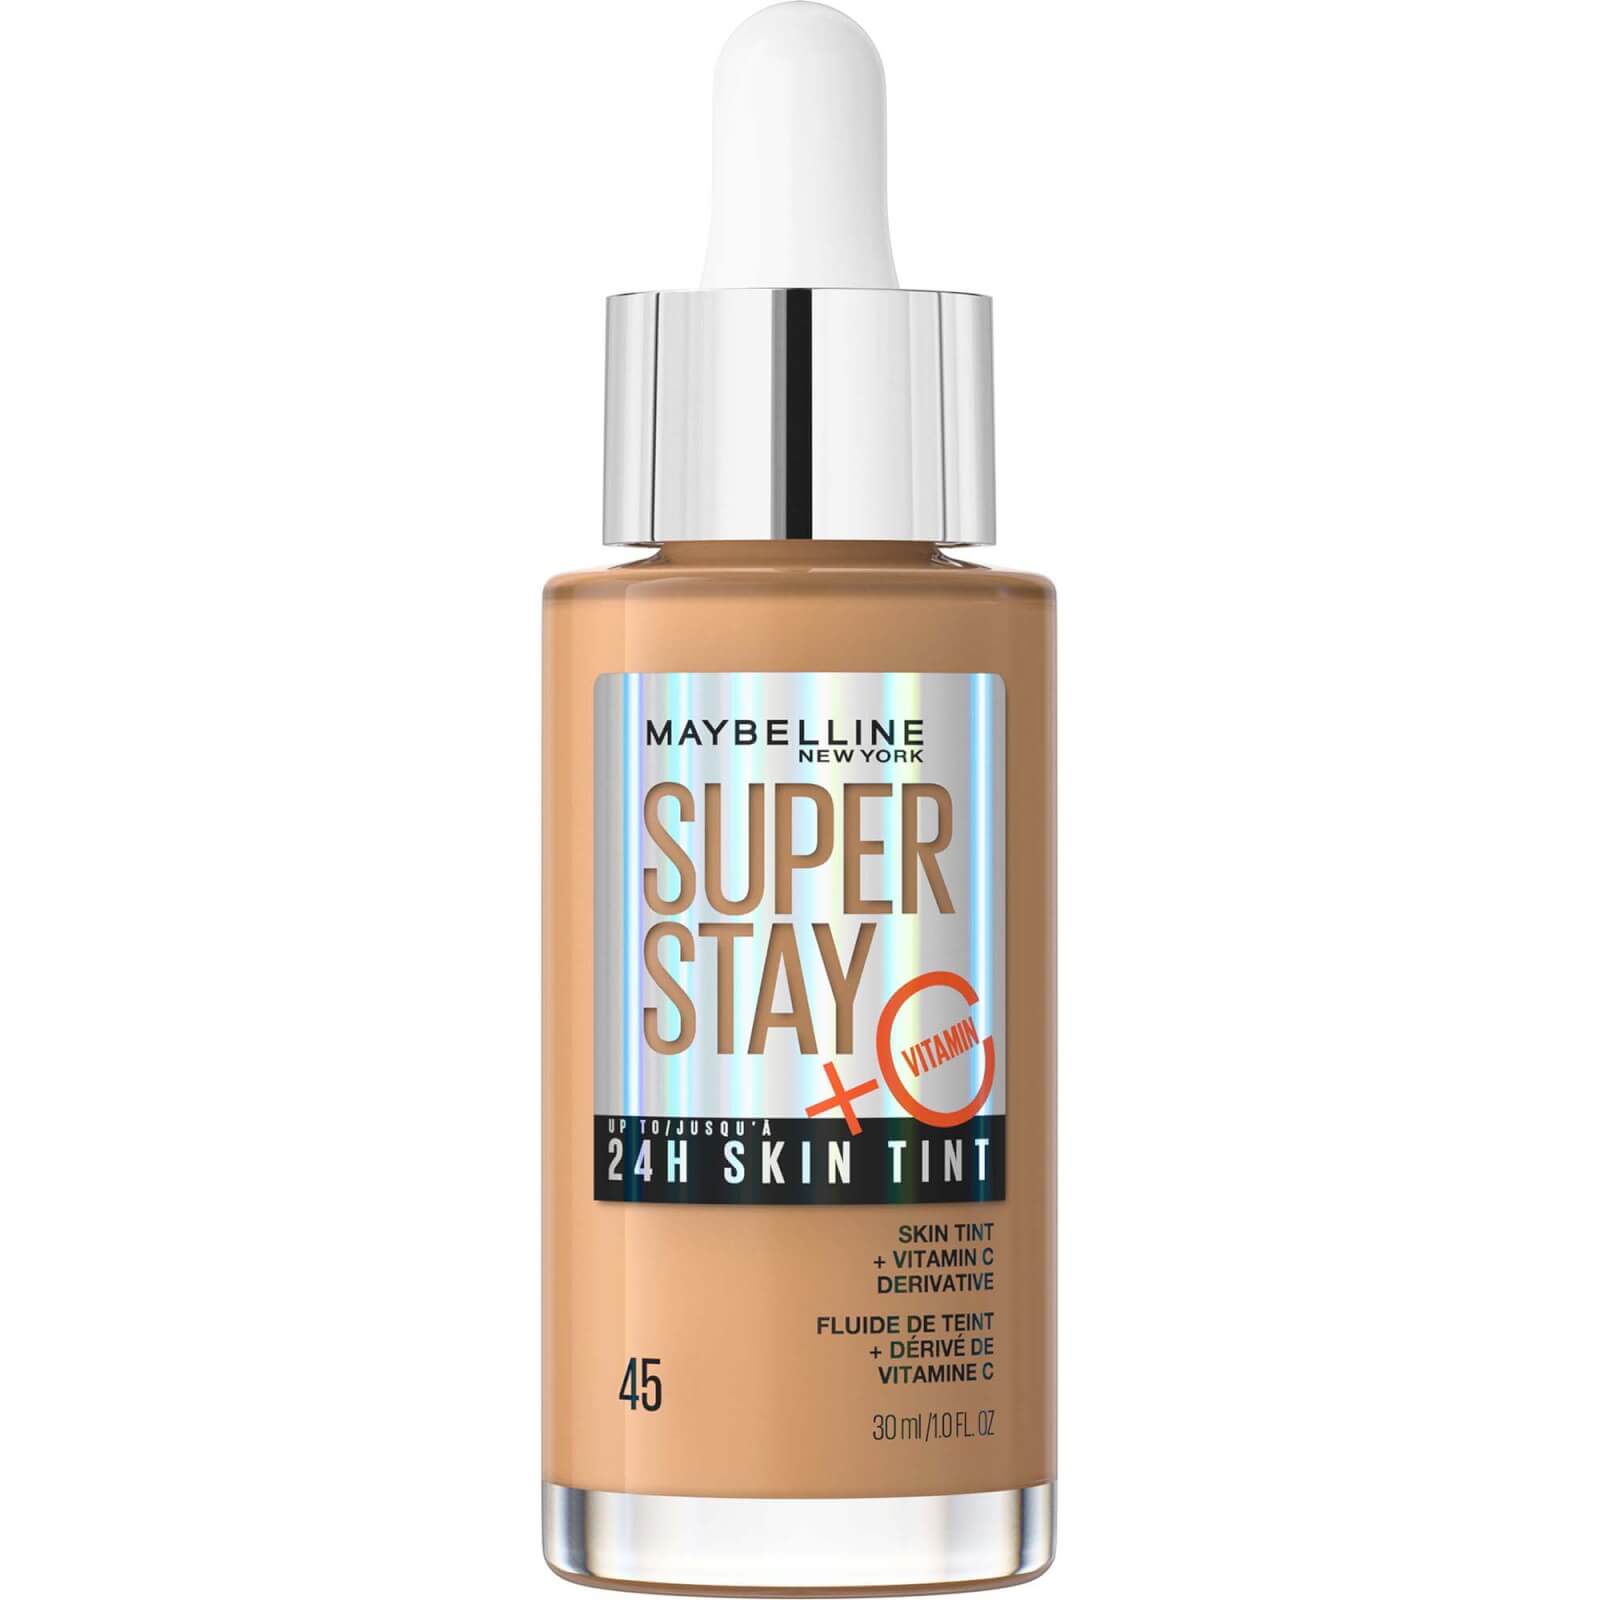 Maybelline Super Stay Up To 24h Skin Tint Foundation + Vitamin C 30ml (various Shades) - 45 In Neutral